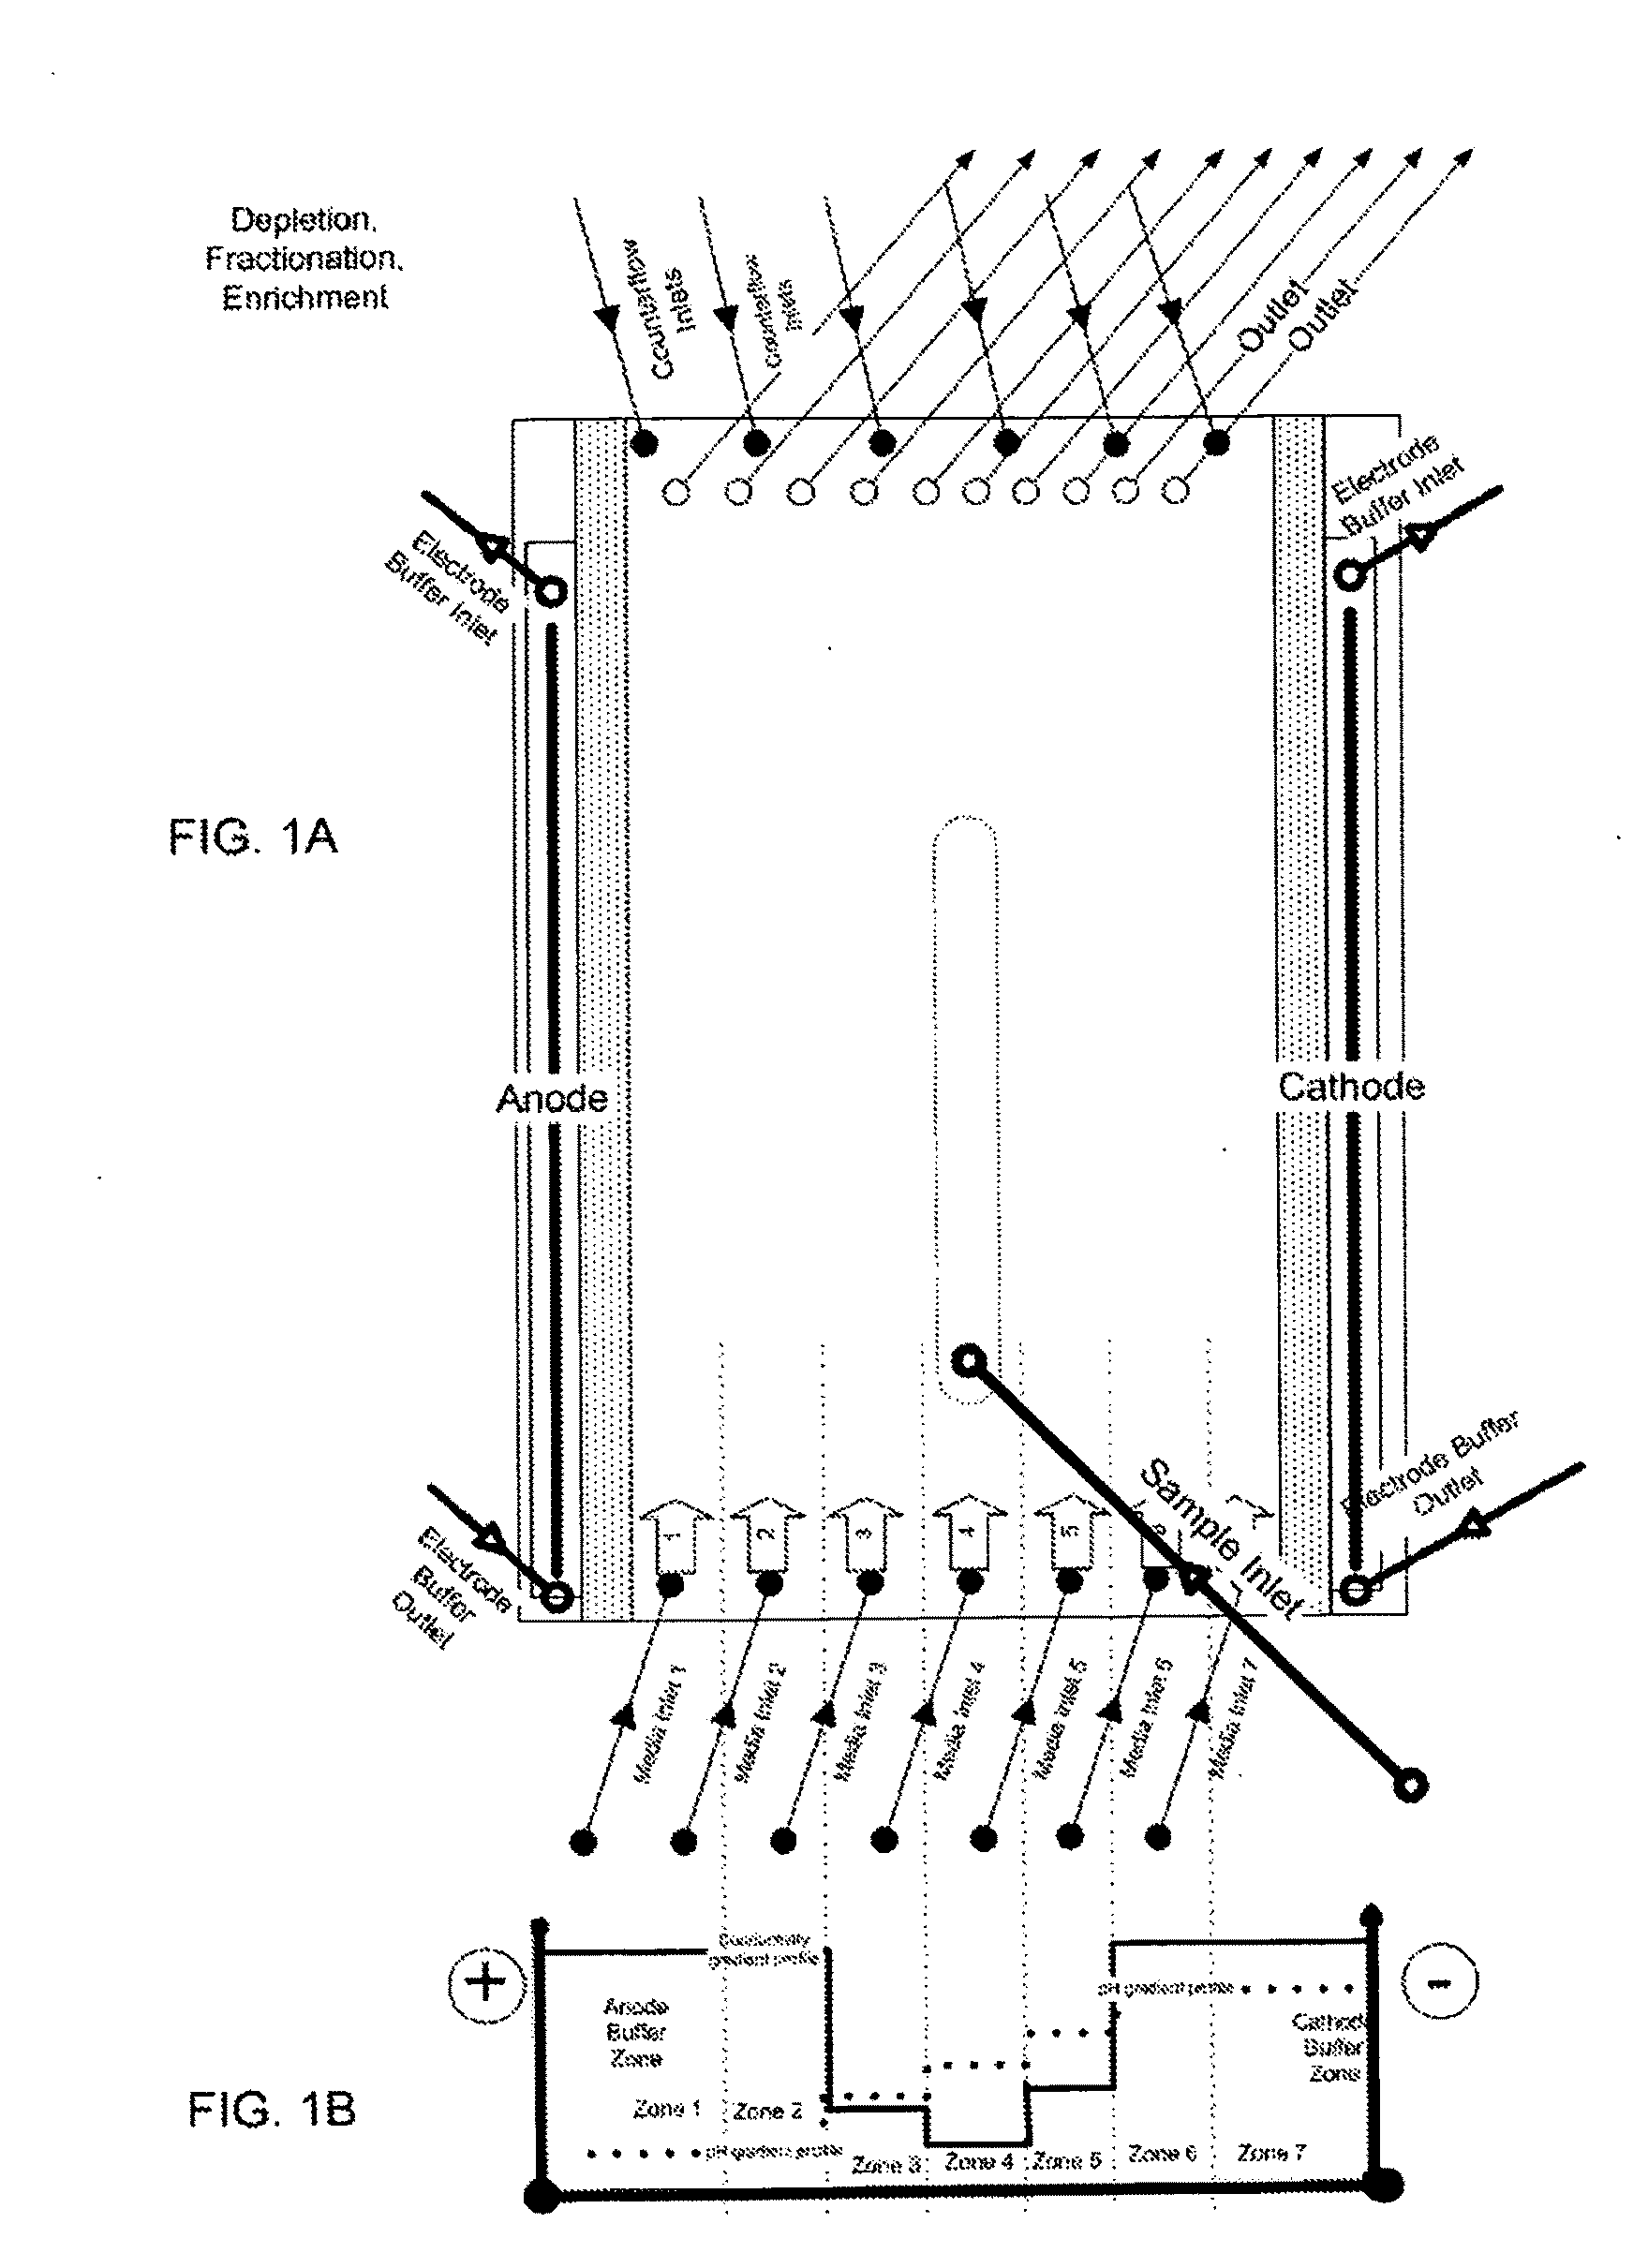 Method and device for separation and depletion of certain proteins and particles using electrophoresis